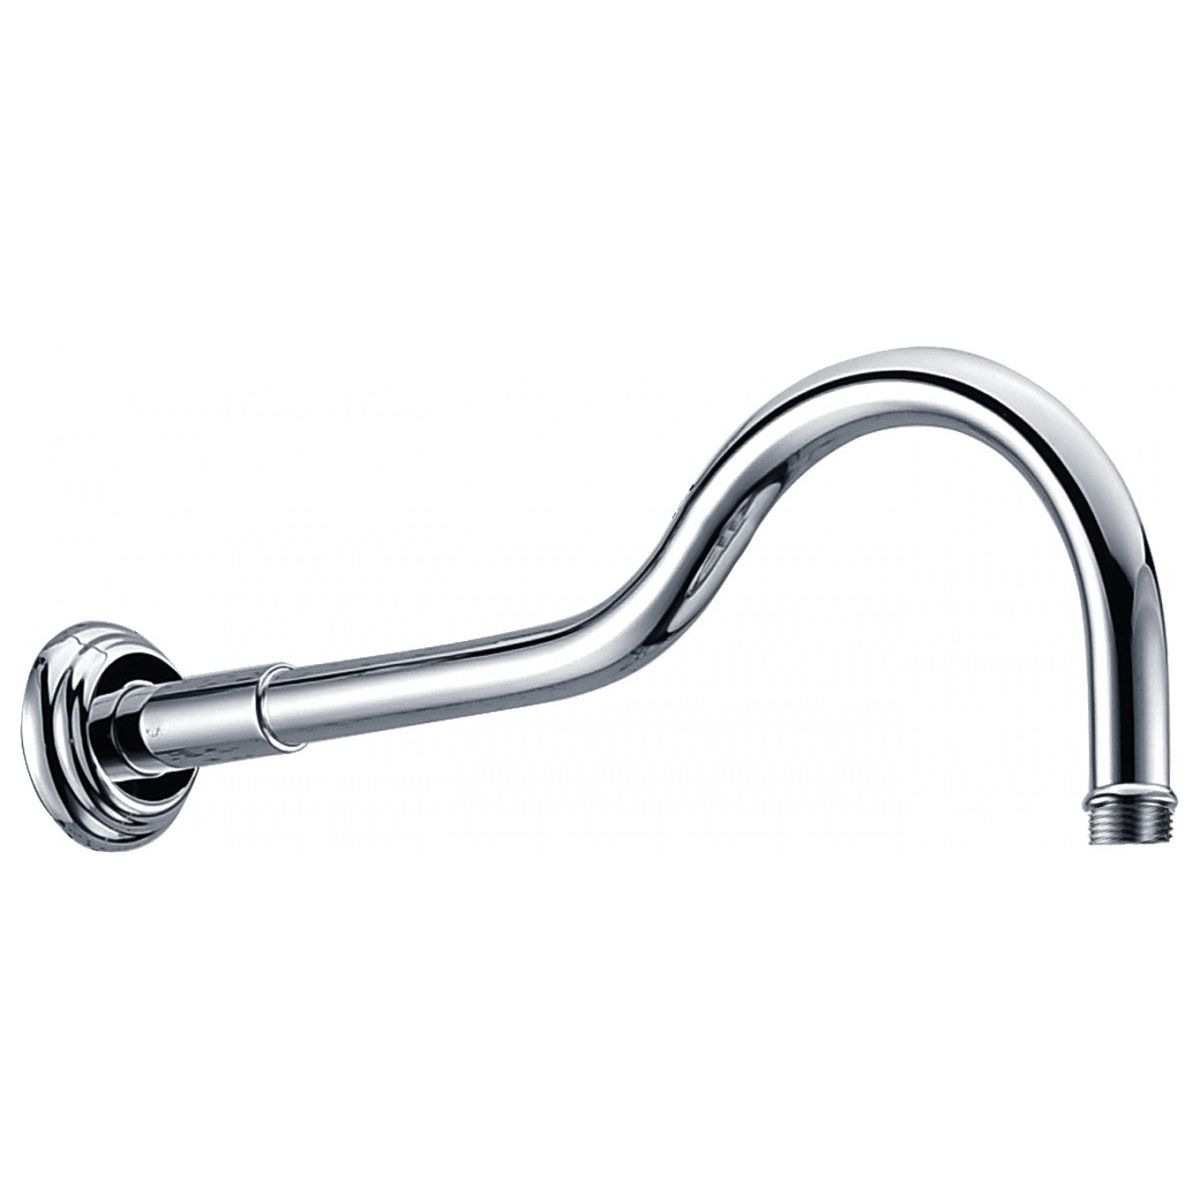 Clasico Wall Shower Arm